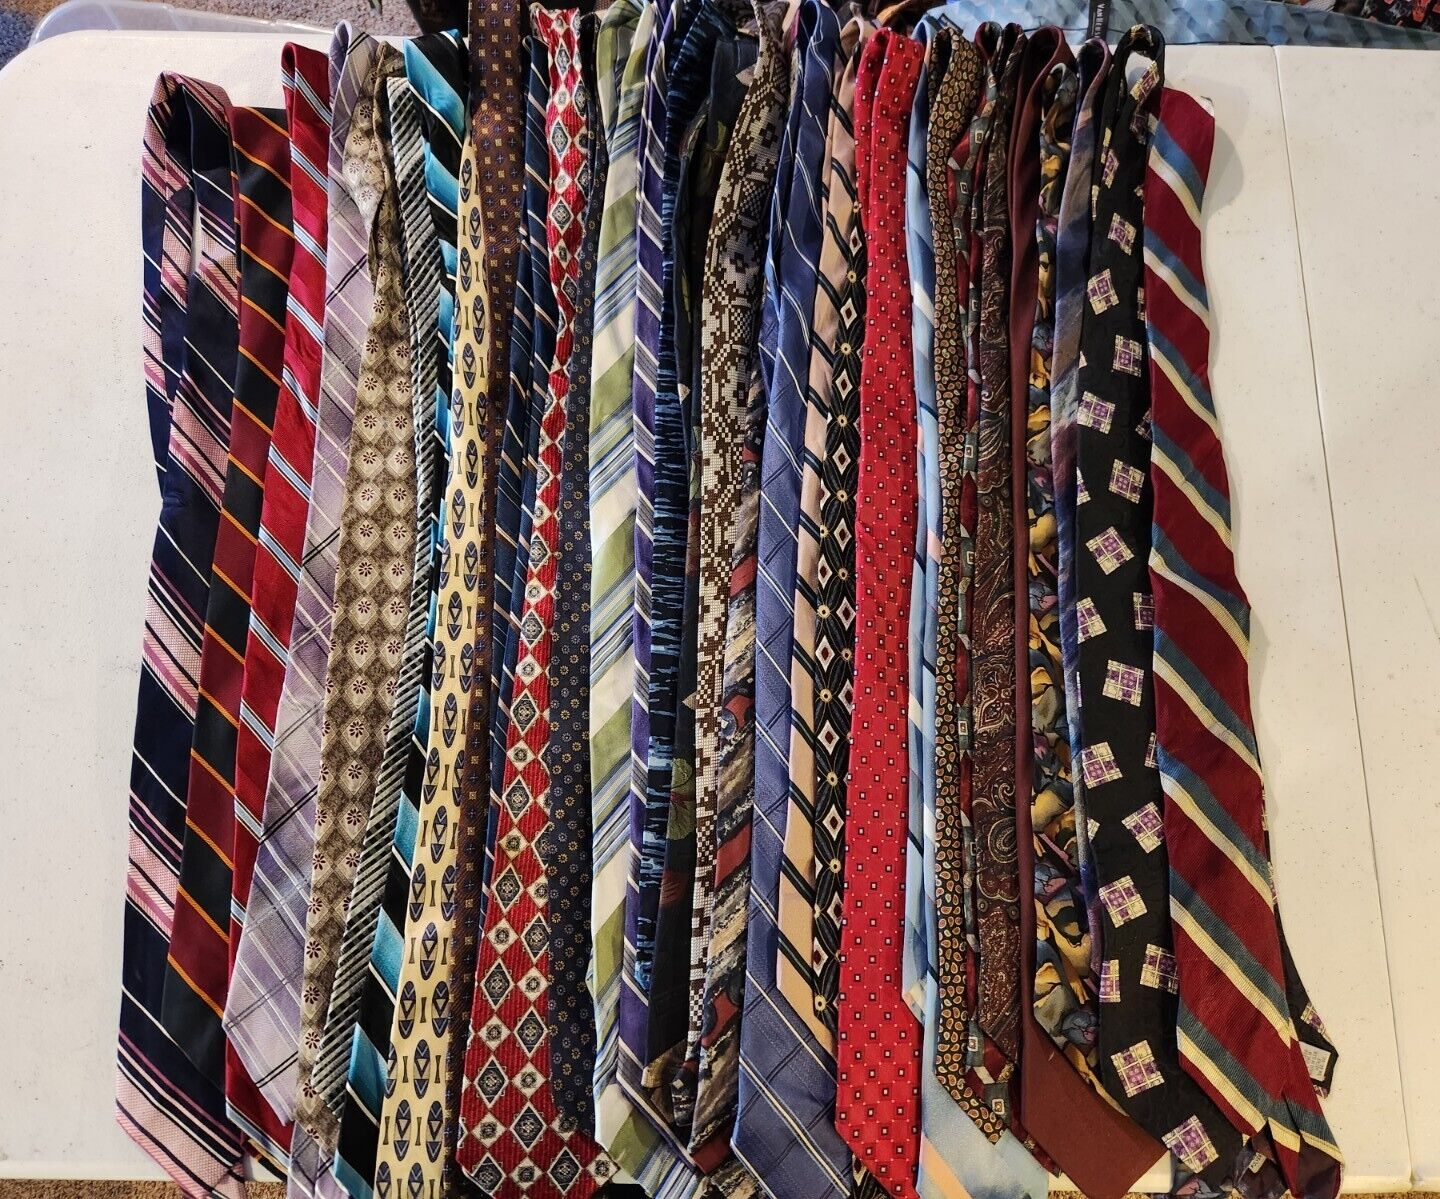 Men’s Modern/Vintage Neck Ties Lot Of 100 For Wear or Craft Or Reselling 